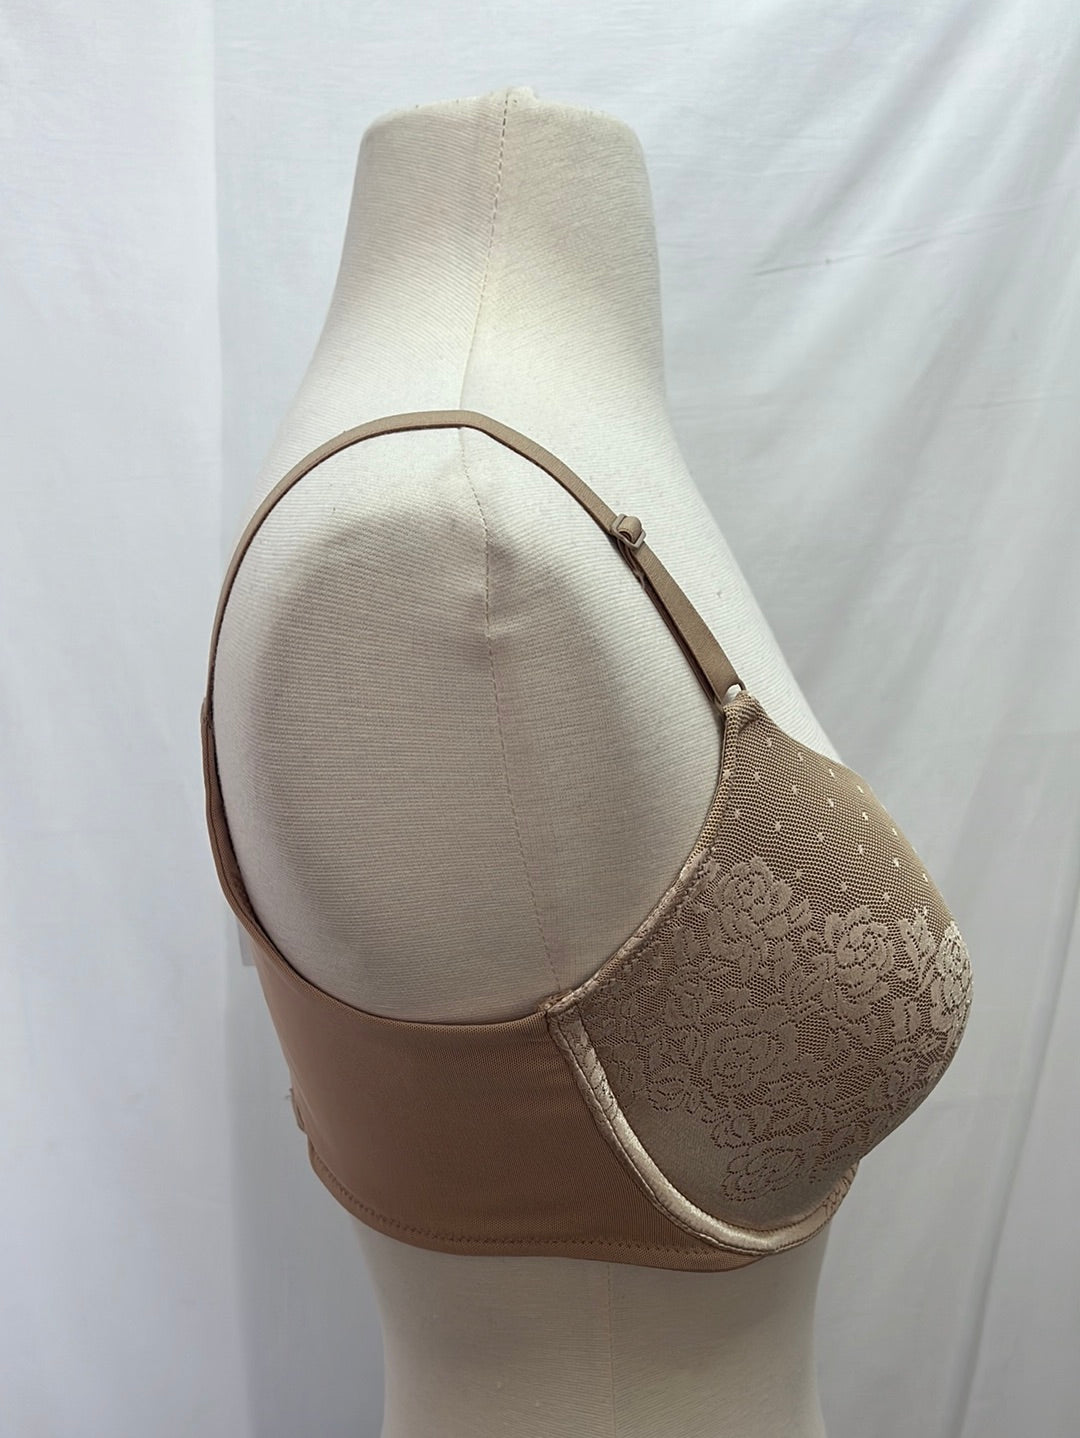 SOMA Nude floral lace bra Tan Size undefined - $28 - From Samantha